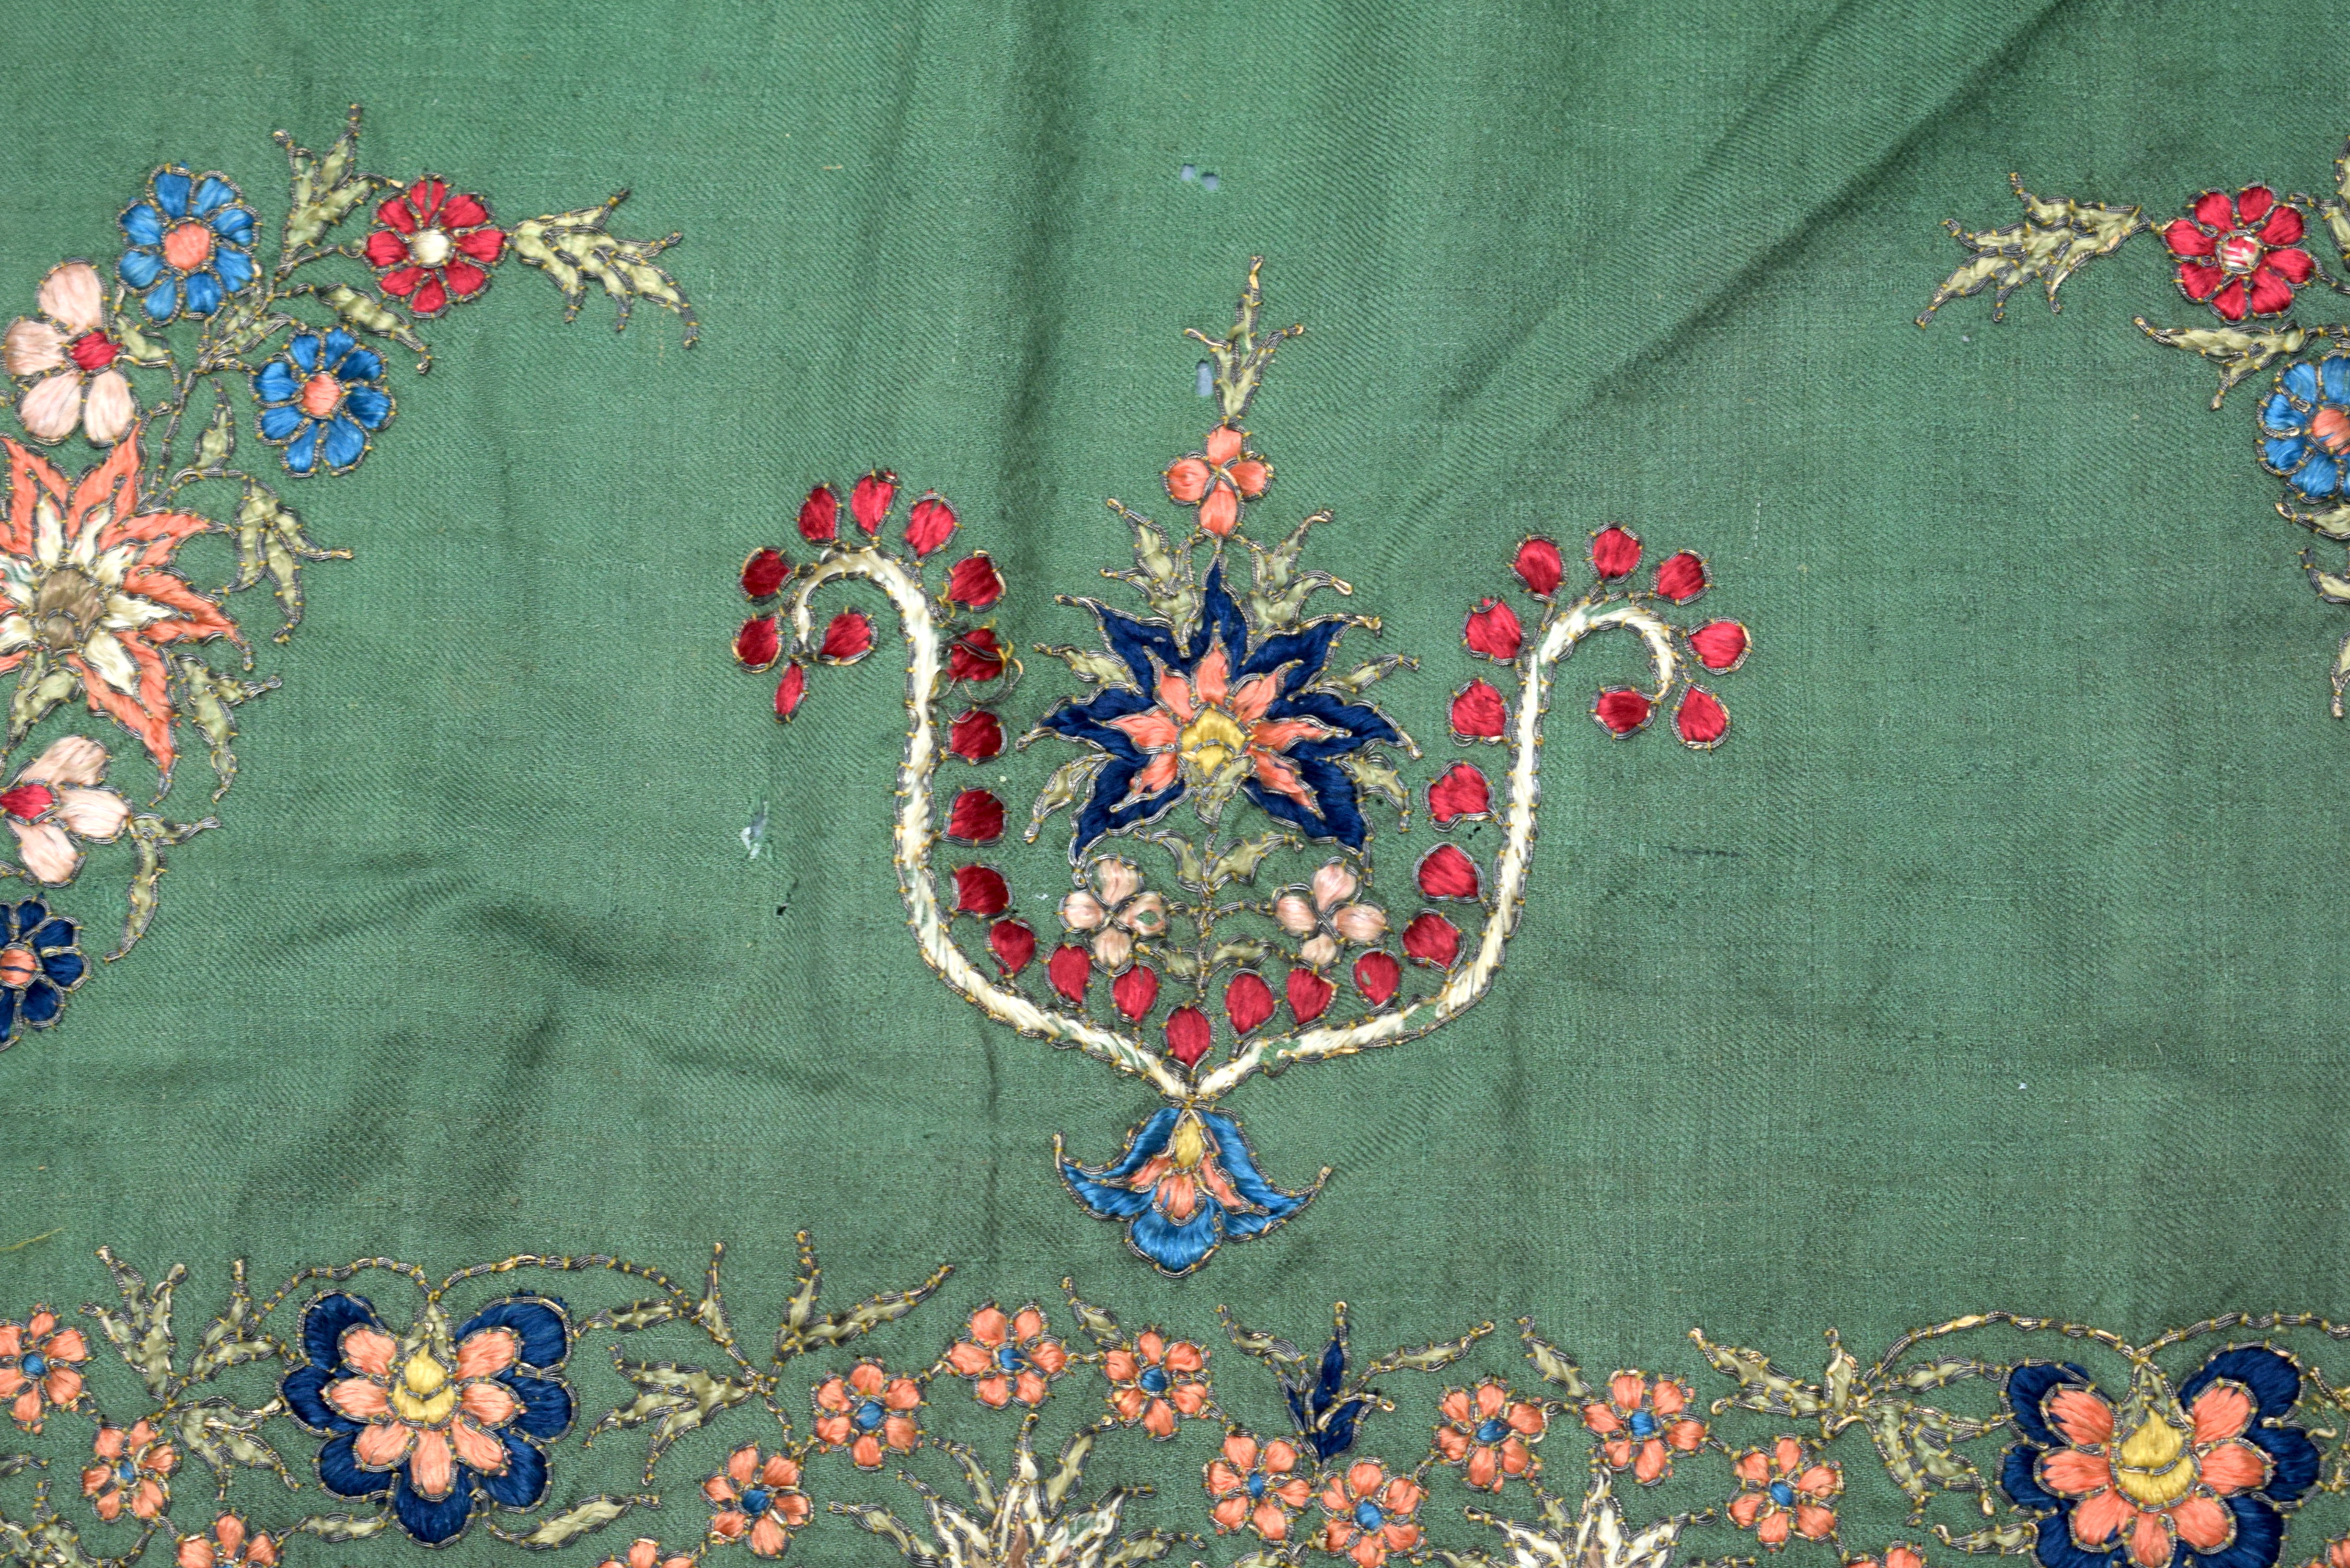 TWO 19TH CENTURY KASHMIRI SILK EMBROIDERED SHAWLS decorated with foliage. (2) - Image 4 of 8